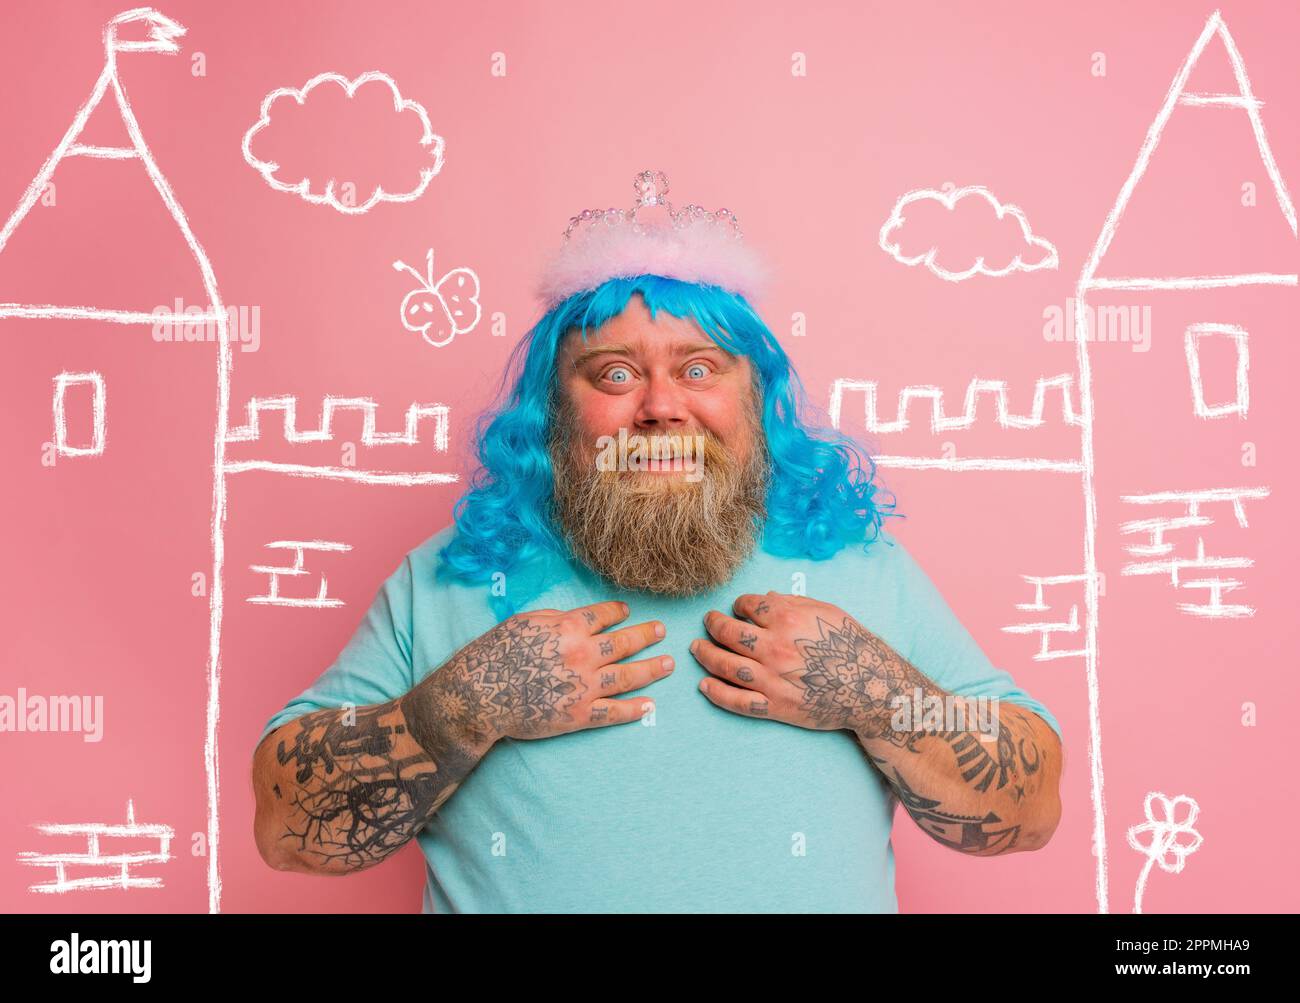 Fat amazed man with tattoos acts like a princess Stock Photo